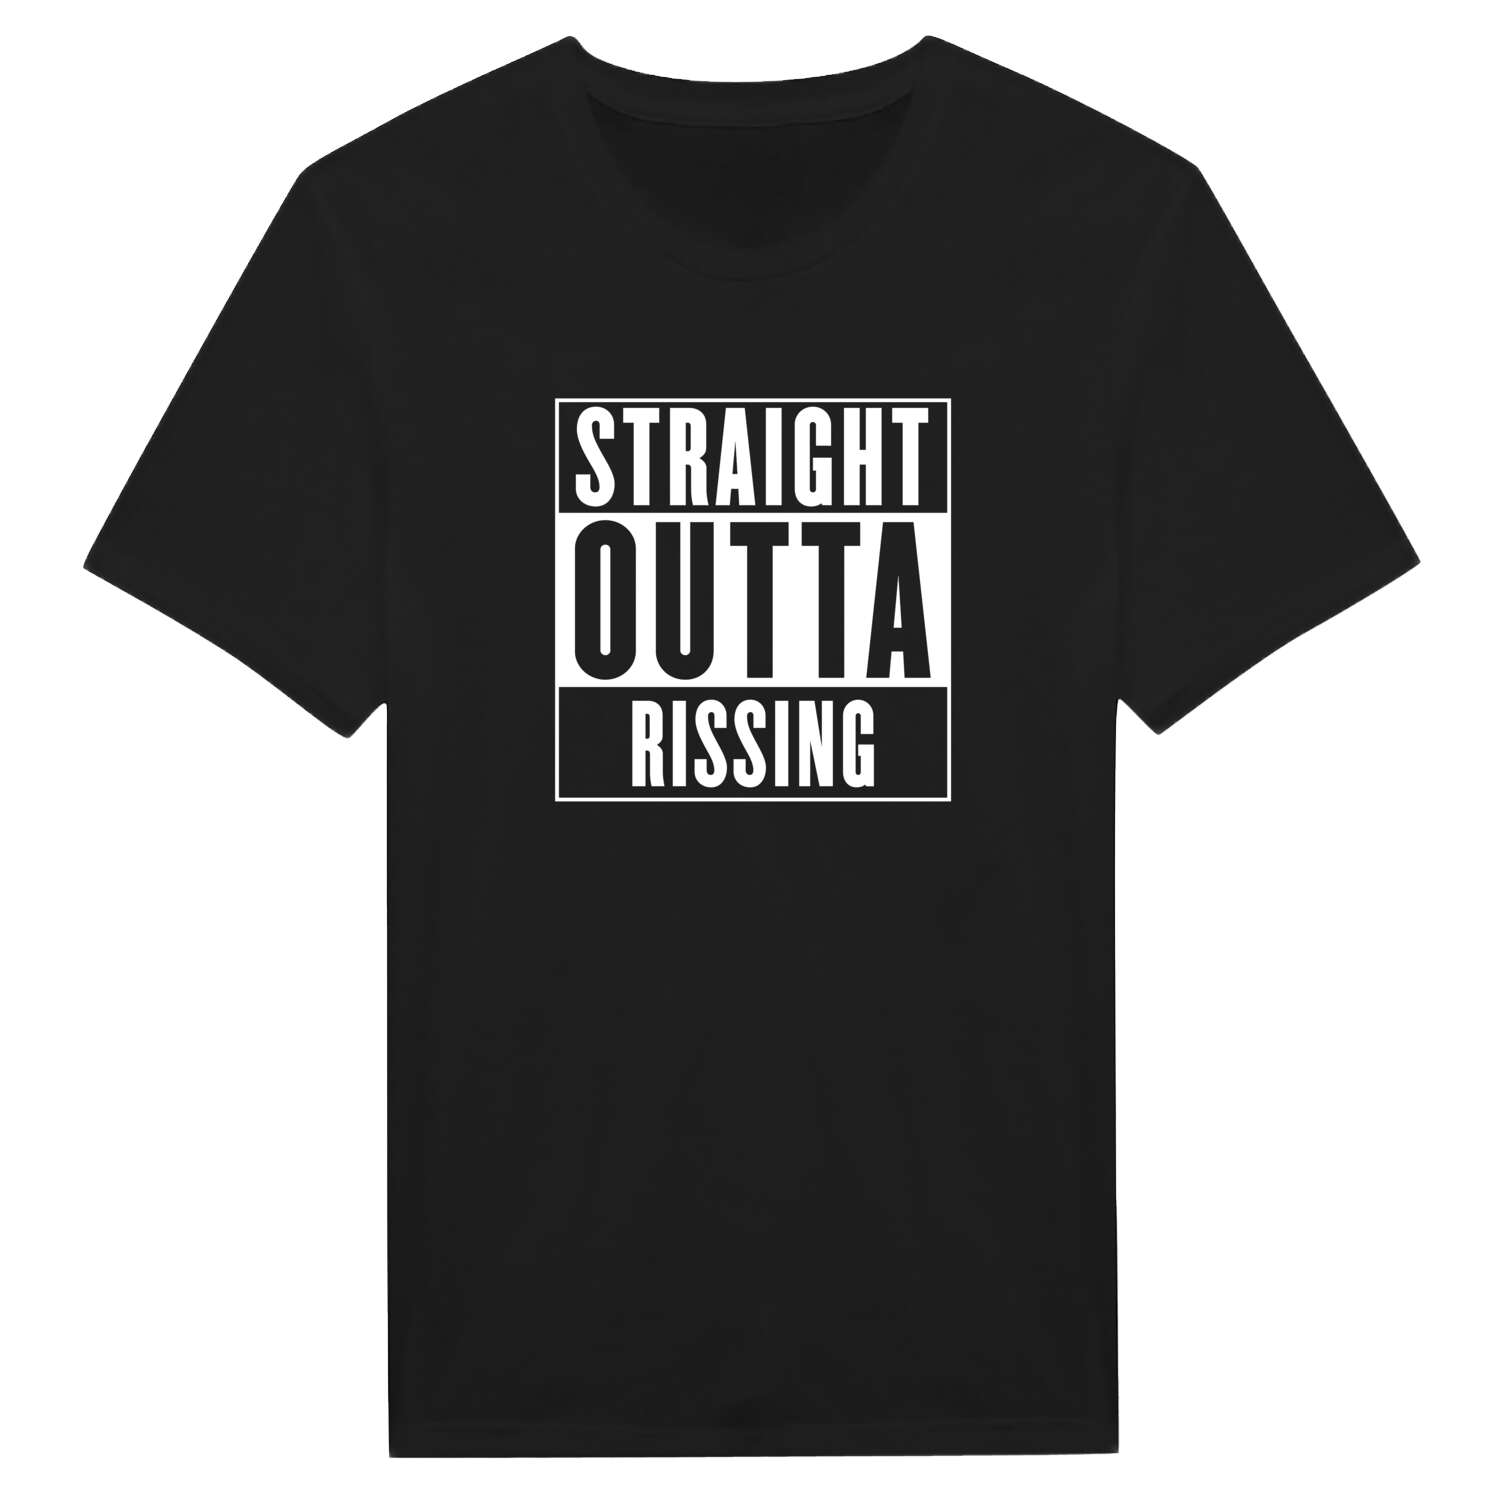 Rissing T-Shirt »Straight Outta«